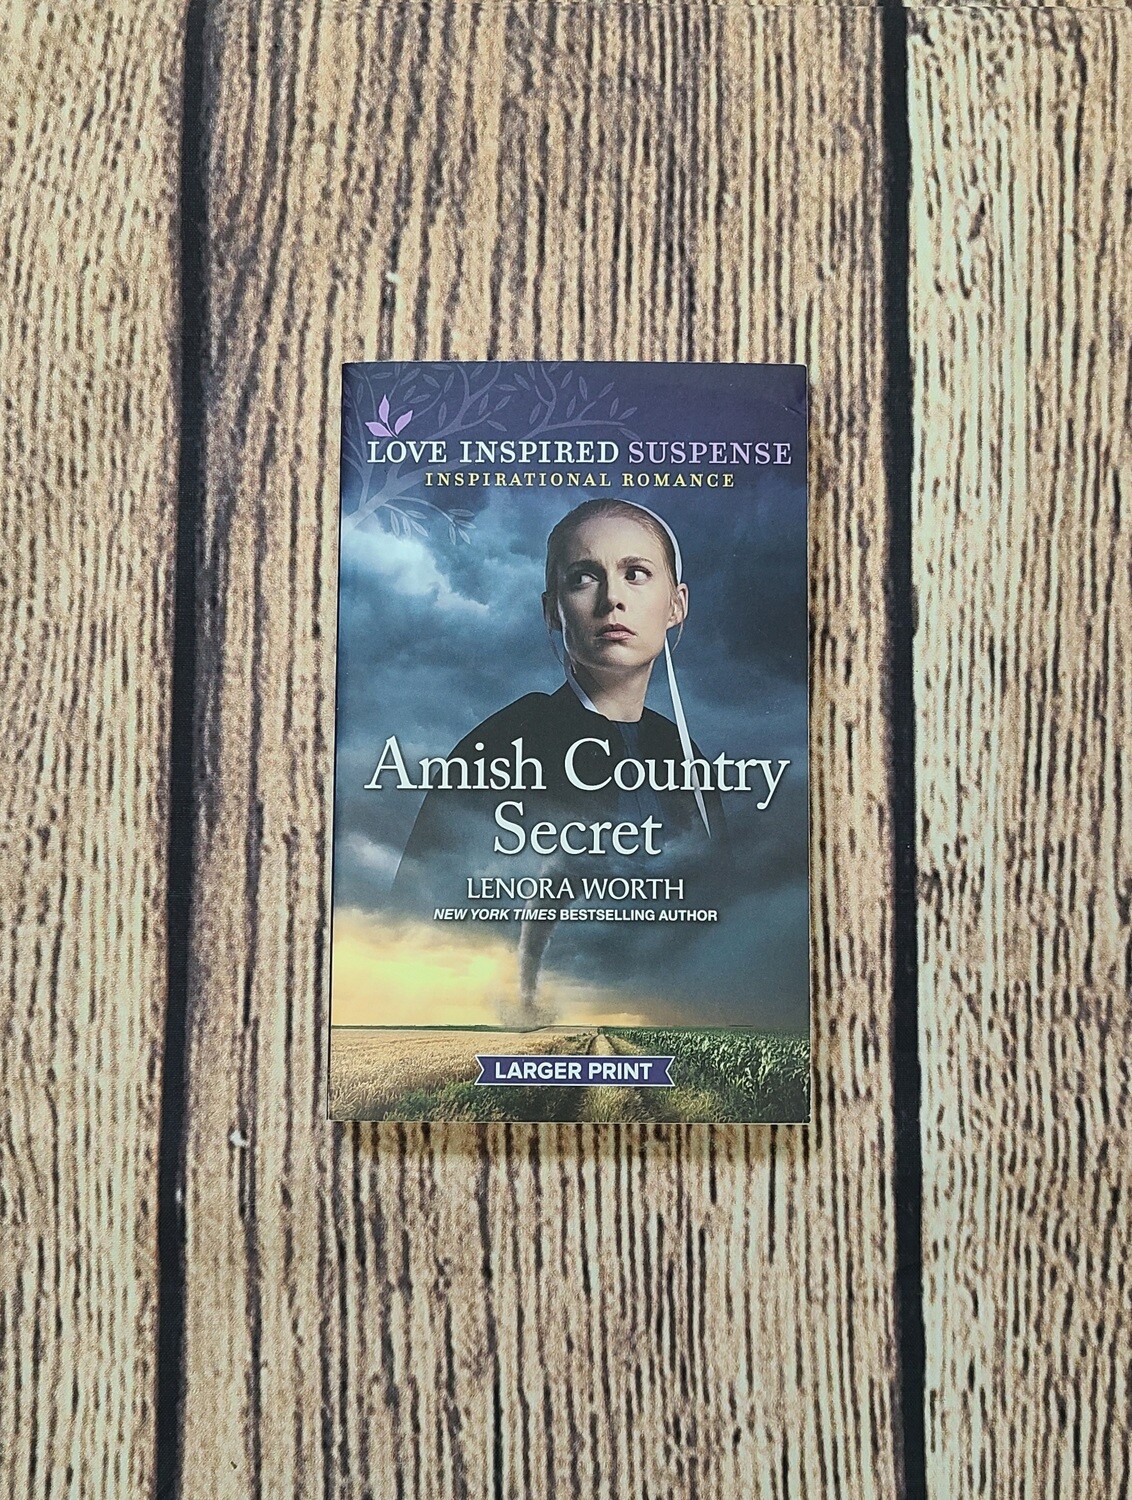 Amish Country Secret by Lenora Worth